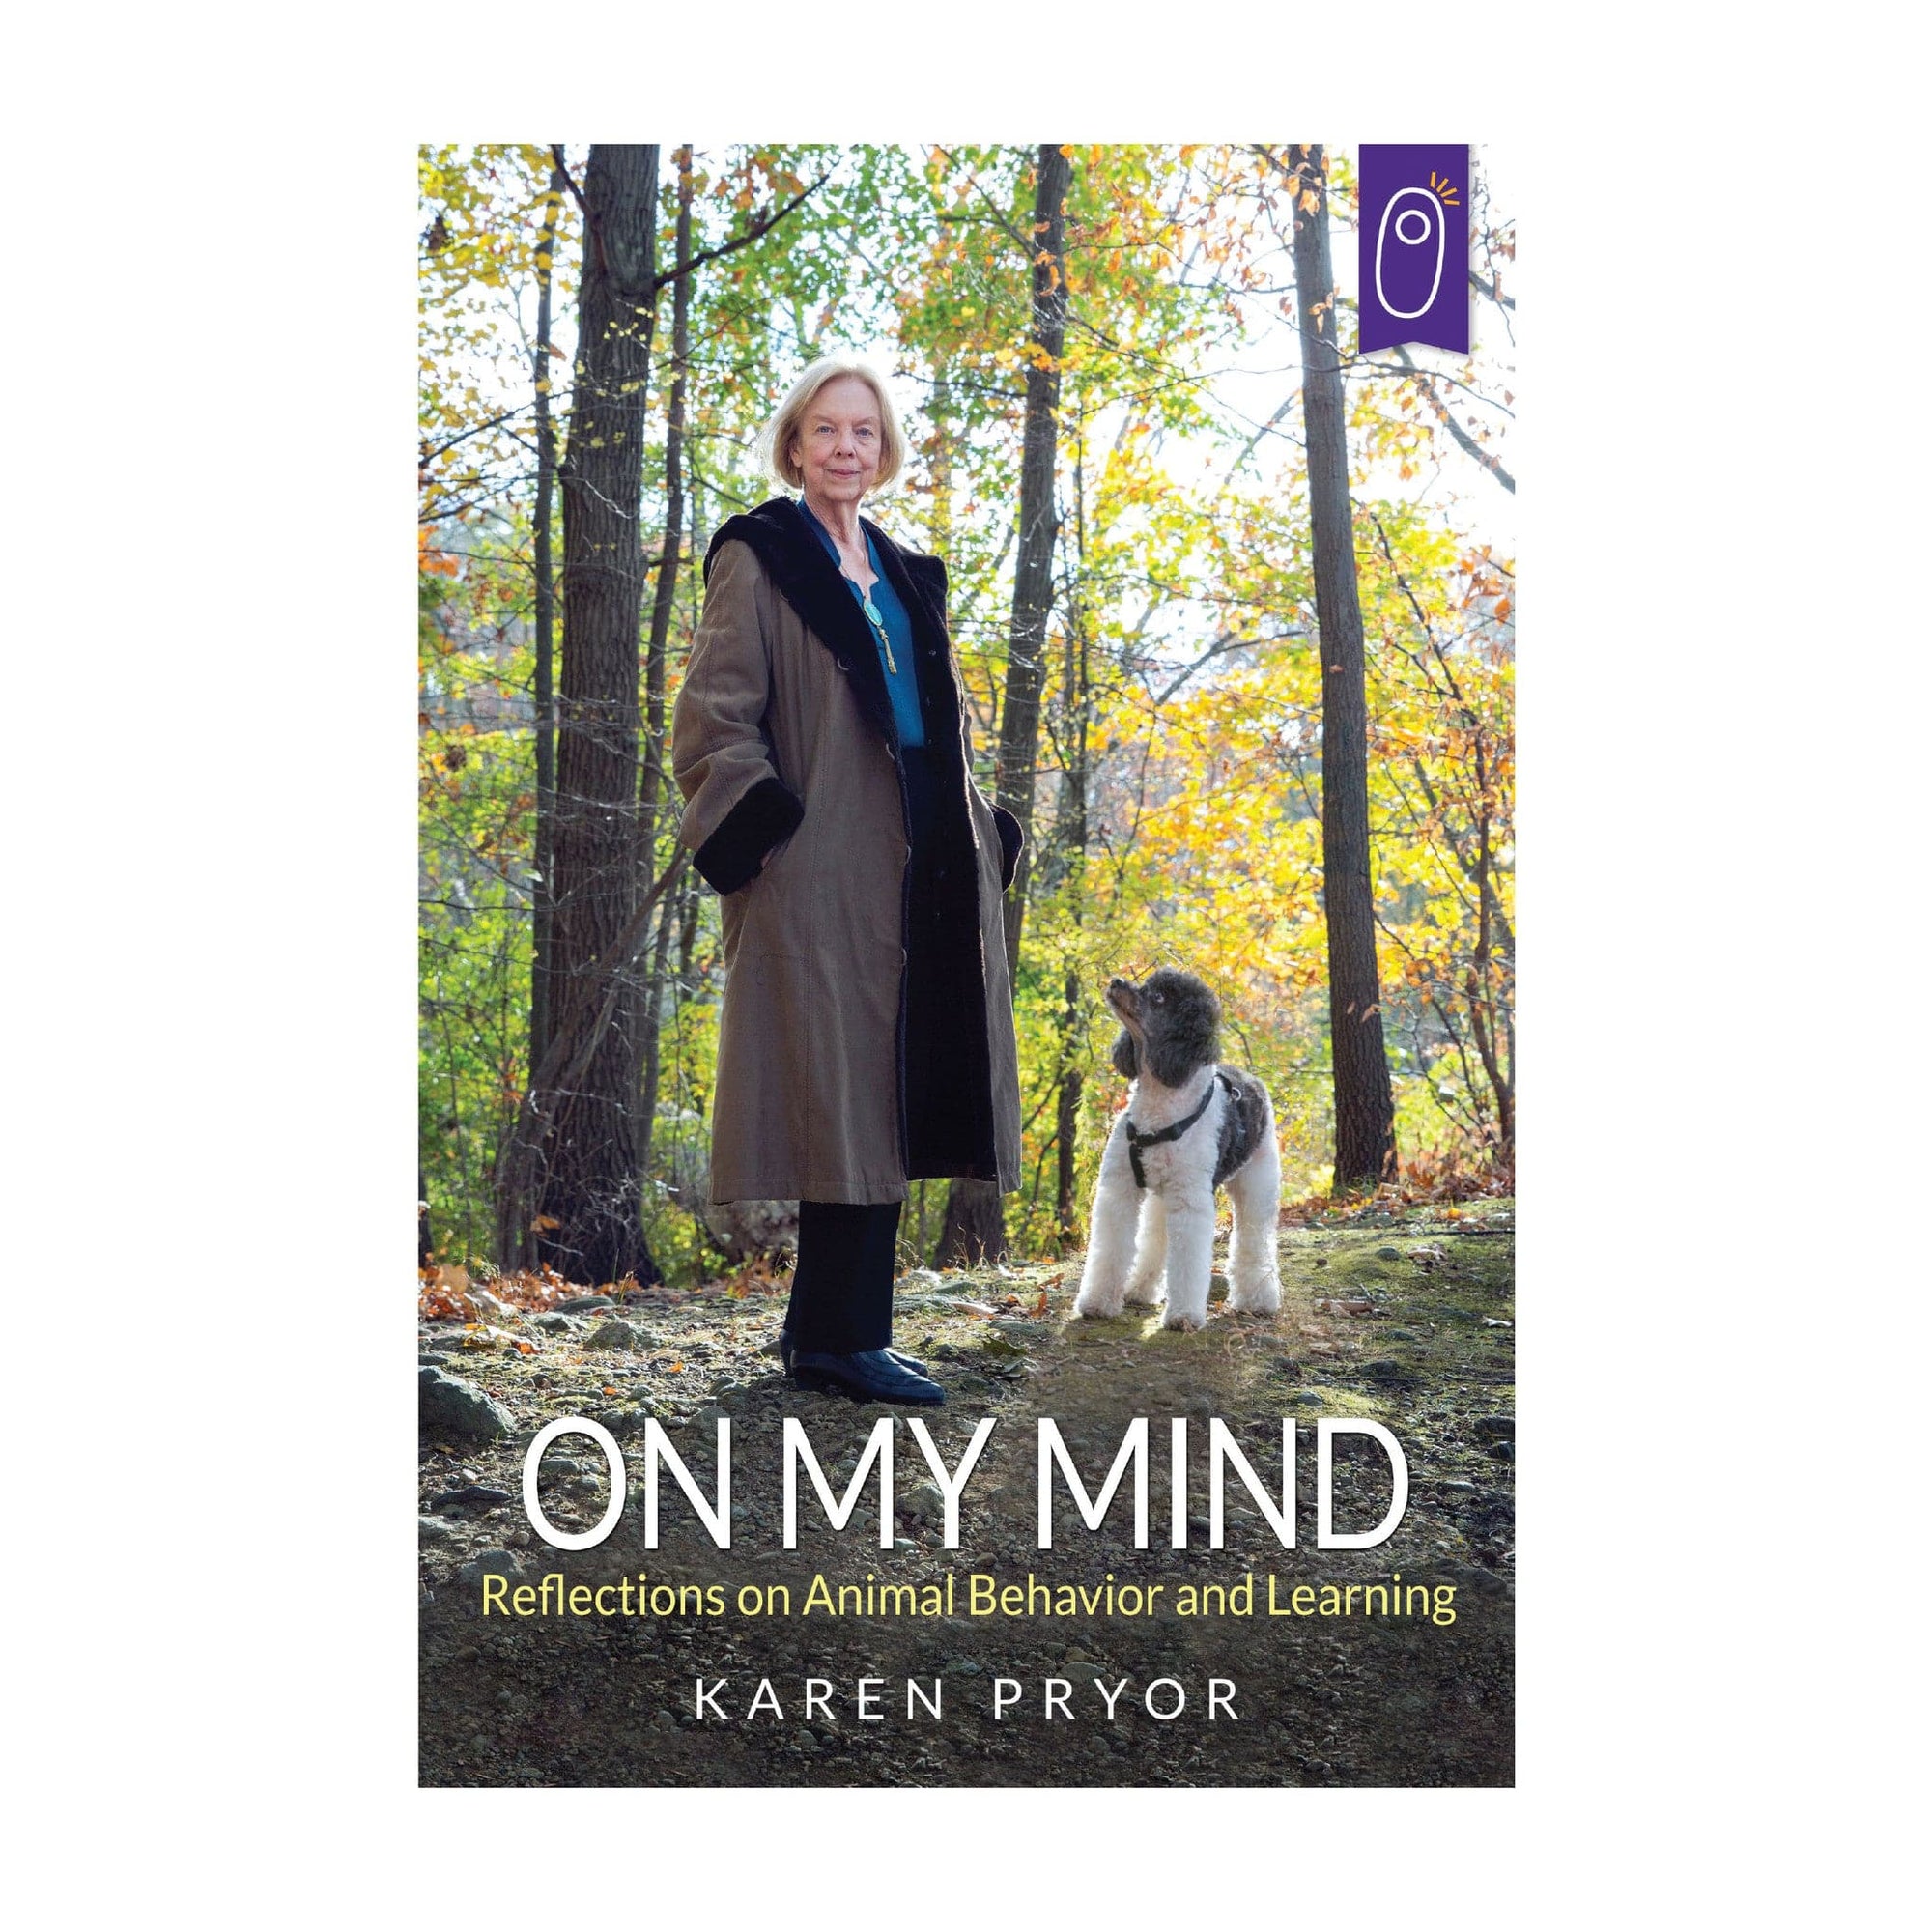 E-BOOK On My Mind: Reflections on Animal Behavior and Learning by Karen Pryor